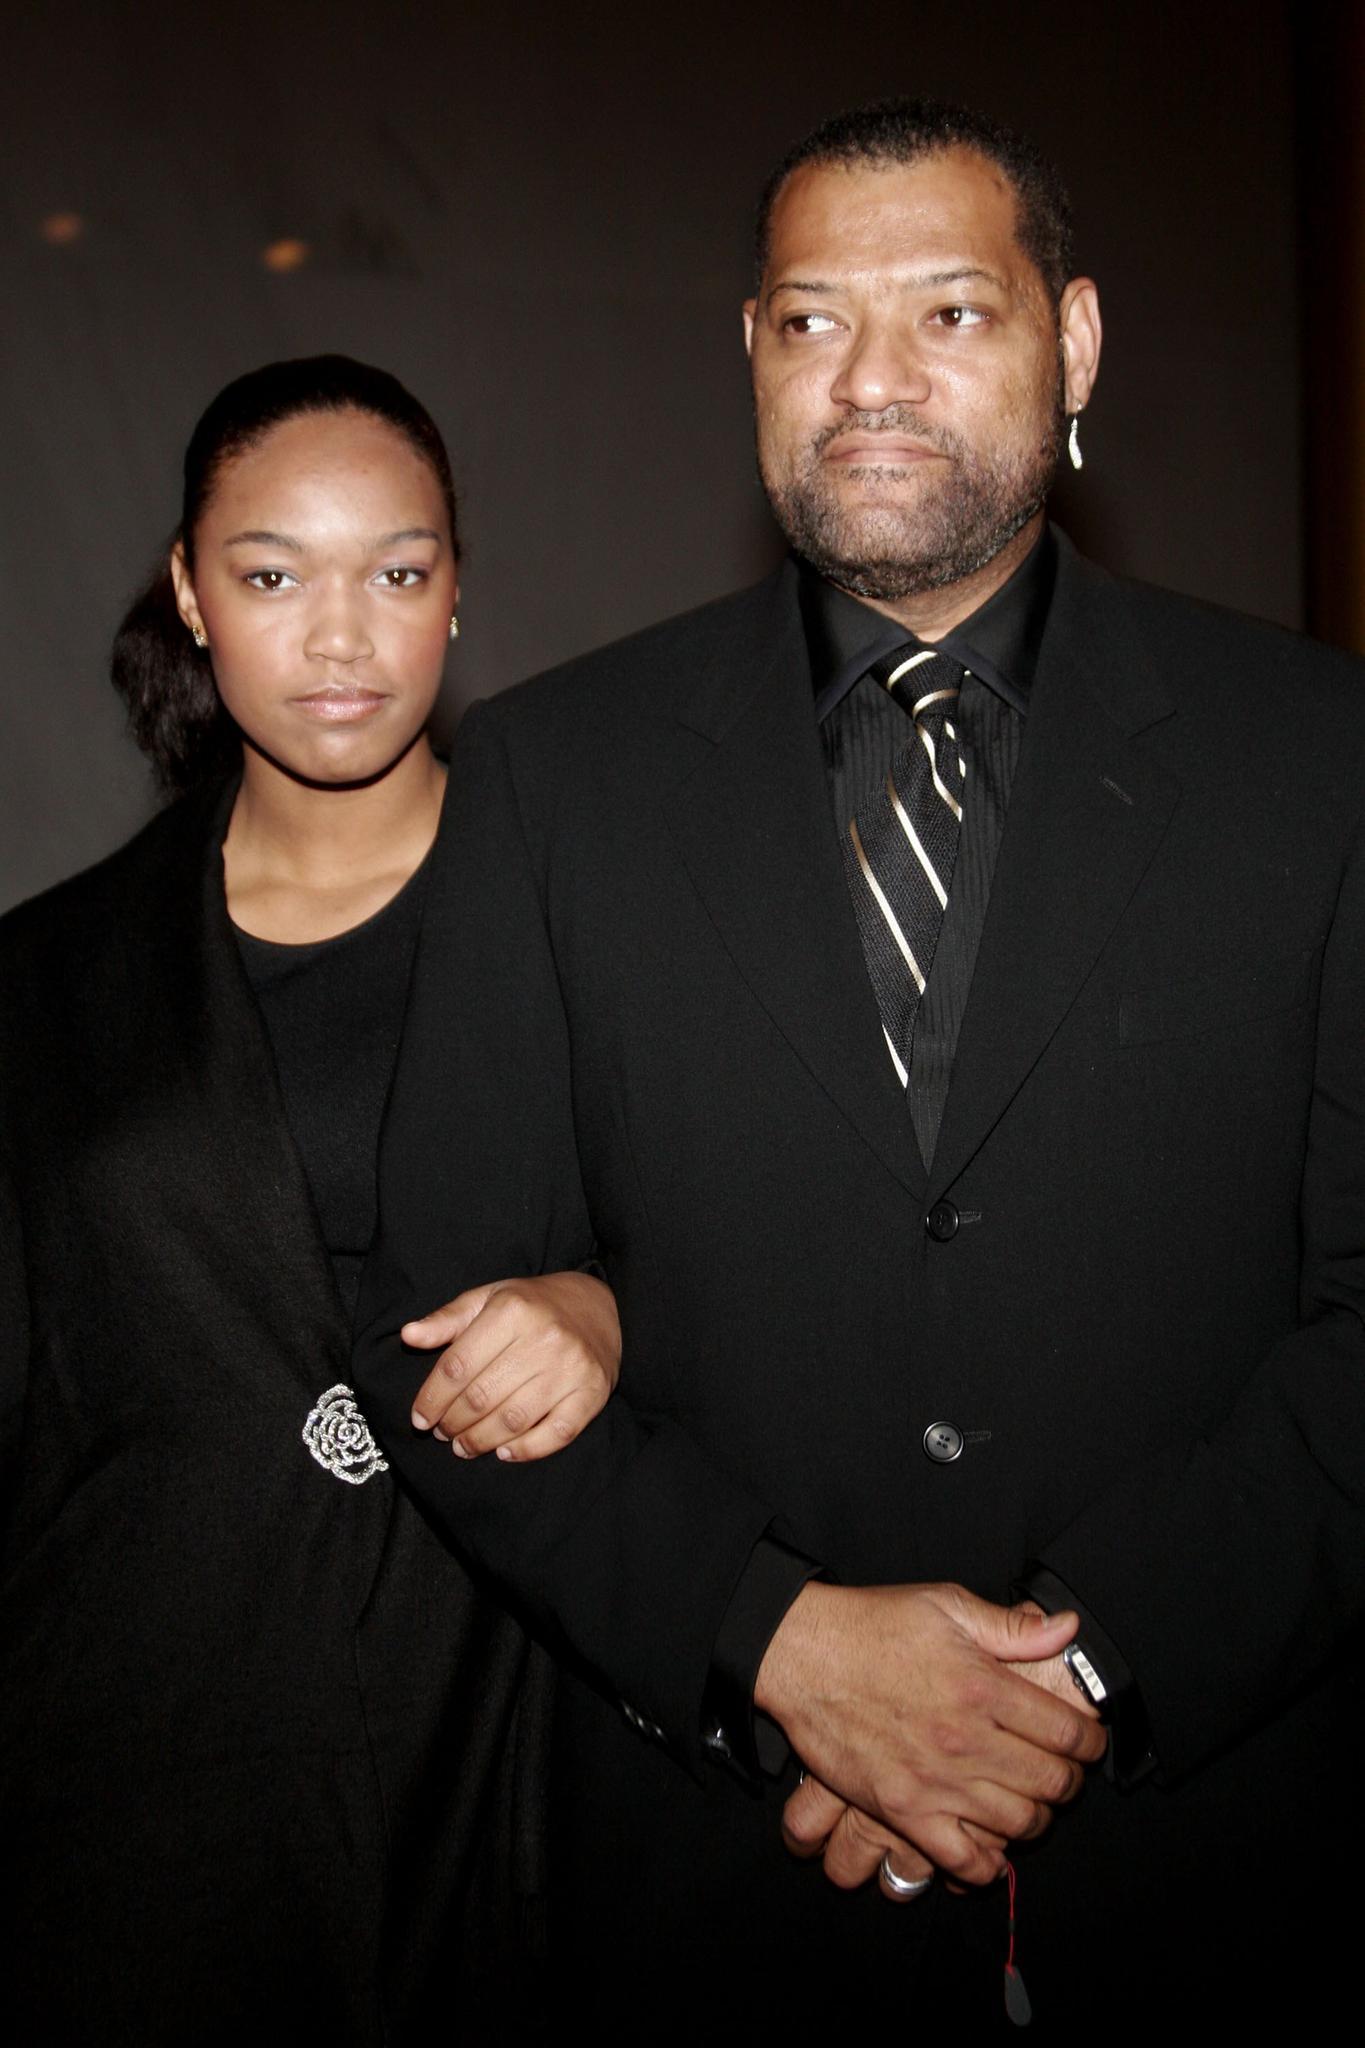 Laurence Fishburne and his 15 year old daughter Montana Fishburne attend an event for Martin Luther King Jr in 2006. Larry Fishburne, as he once went by, has been in films for nearly 40 years. Media outlets say the 2 have stopped speaking to one another since she took up her new trade, which is porn.